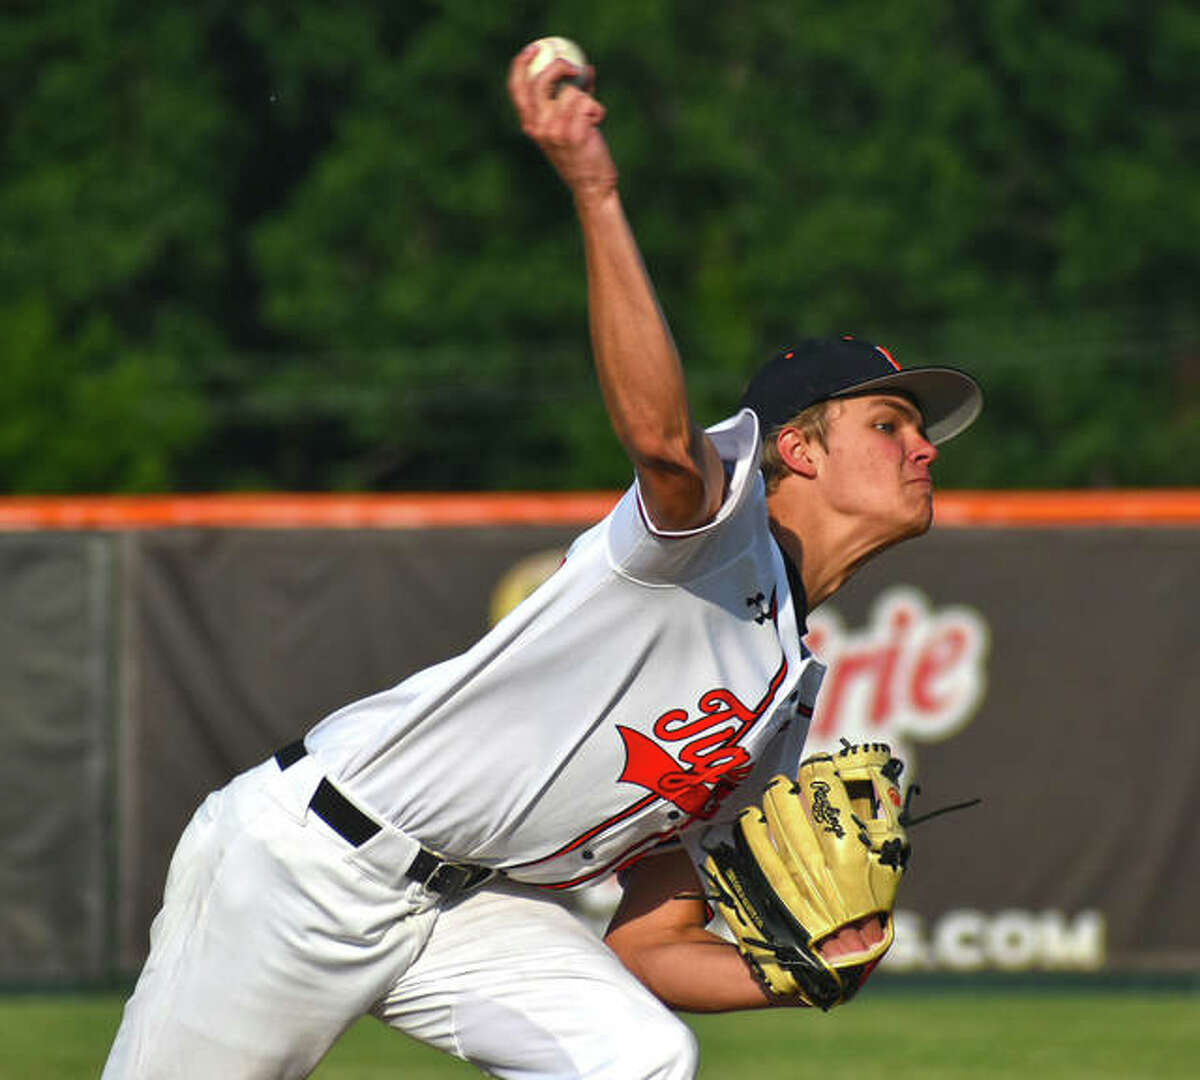 Edwardsville senior Quinn Weber fires a pitch to a Collinsville hitter during the postseason opener at Tom Pile Field.